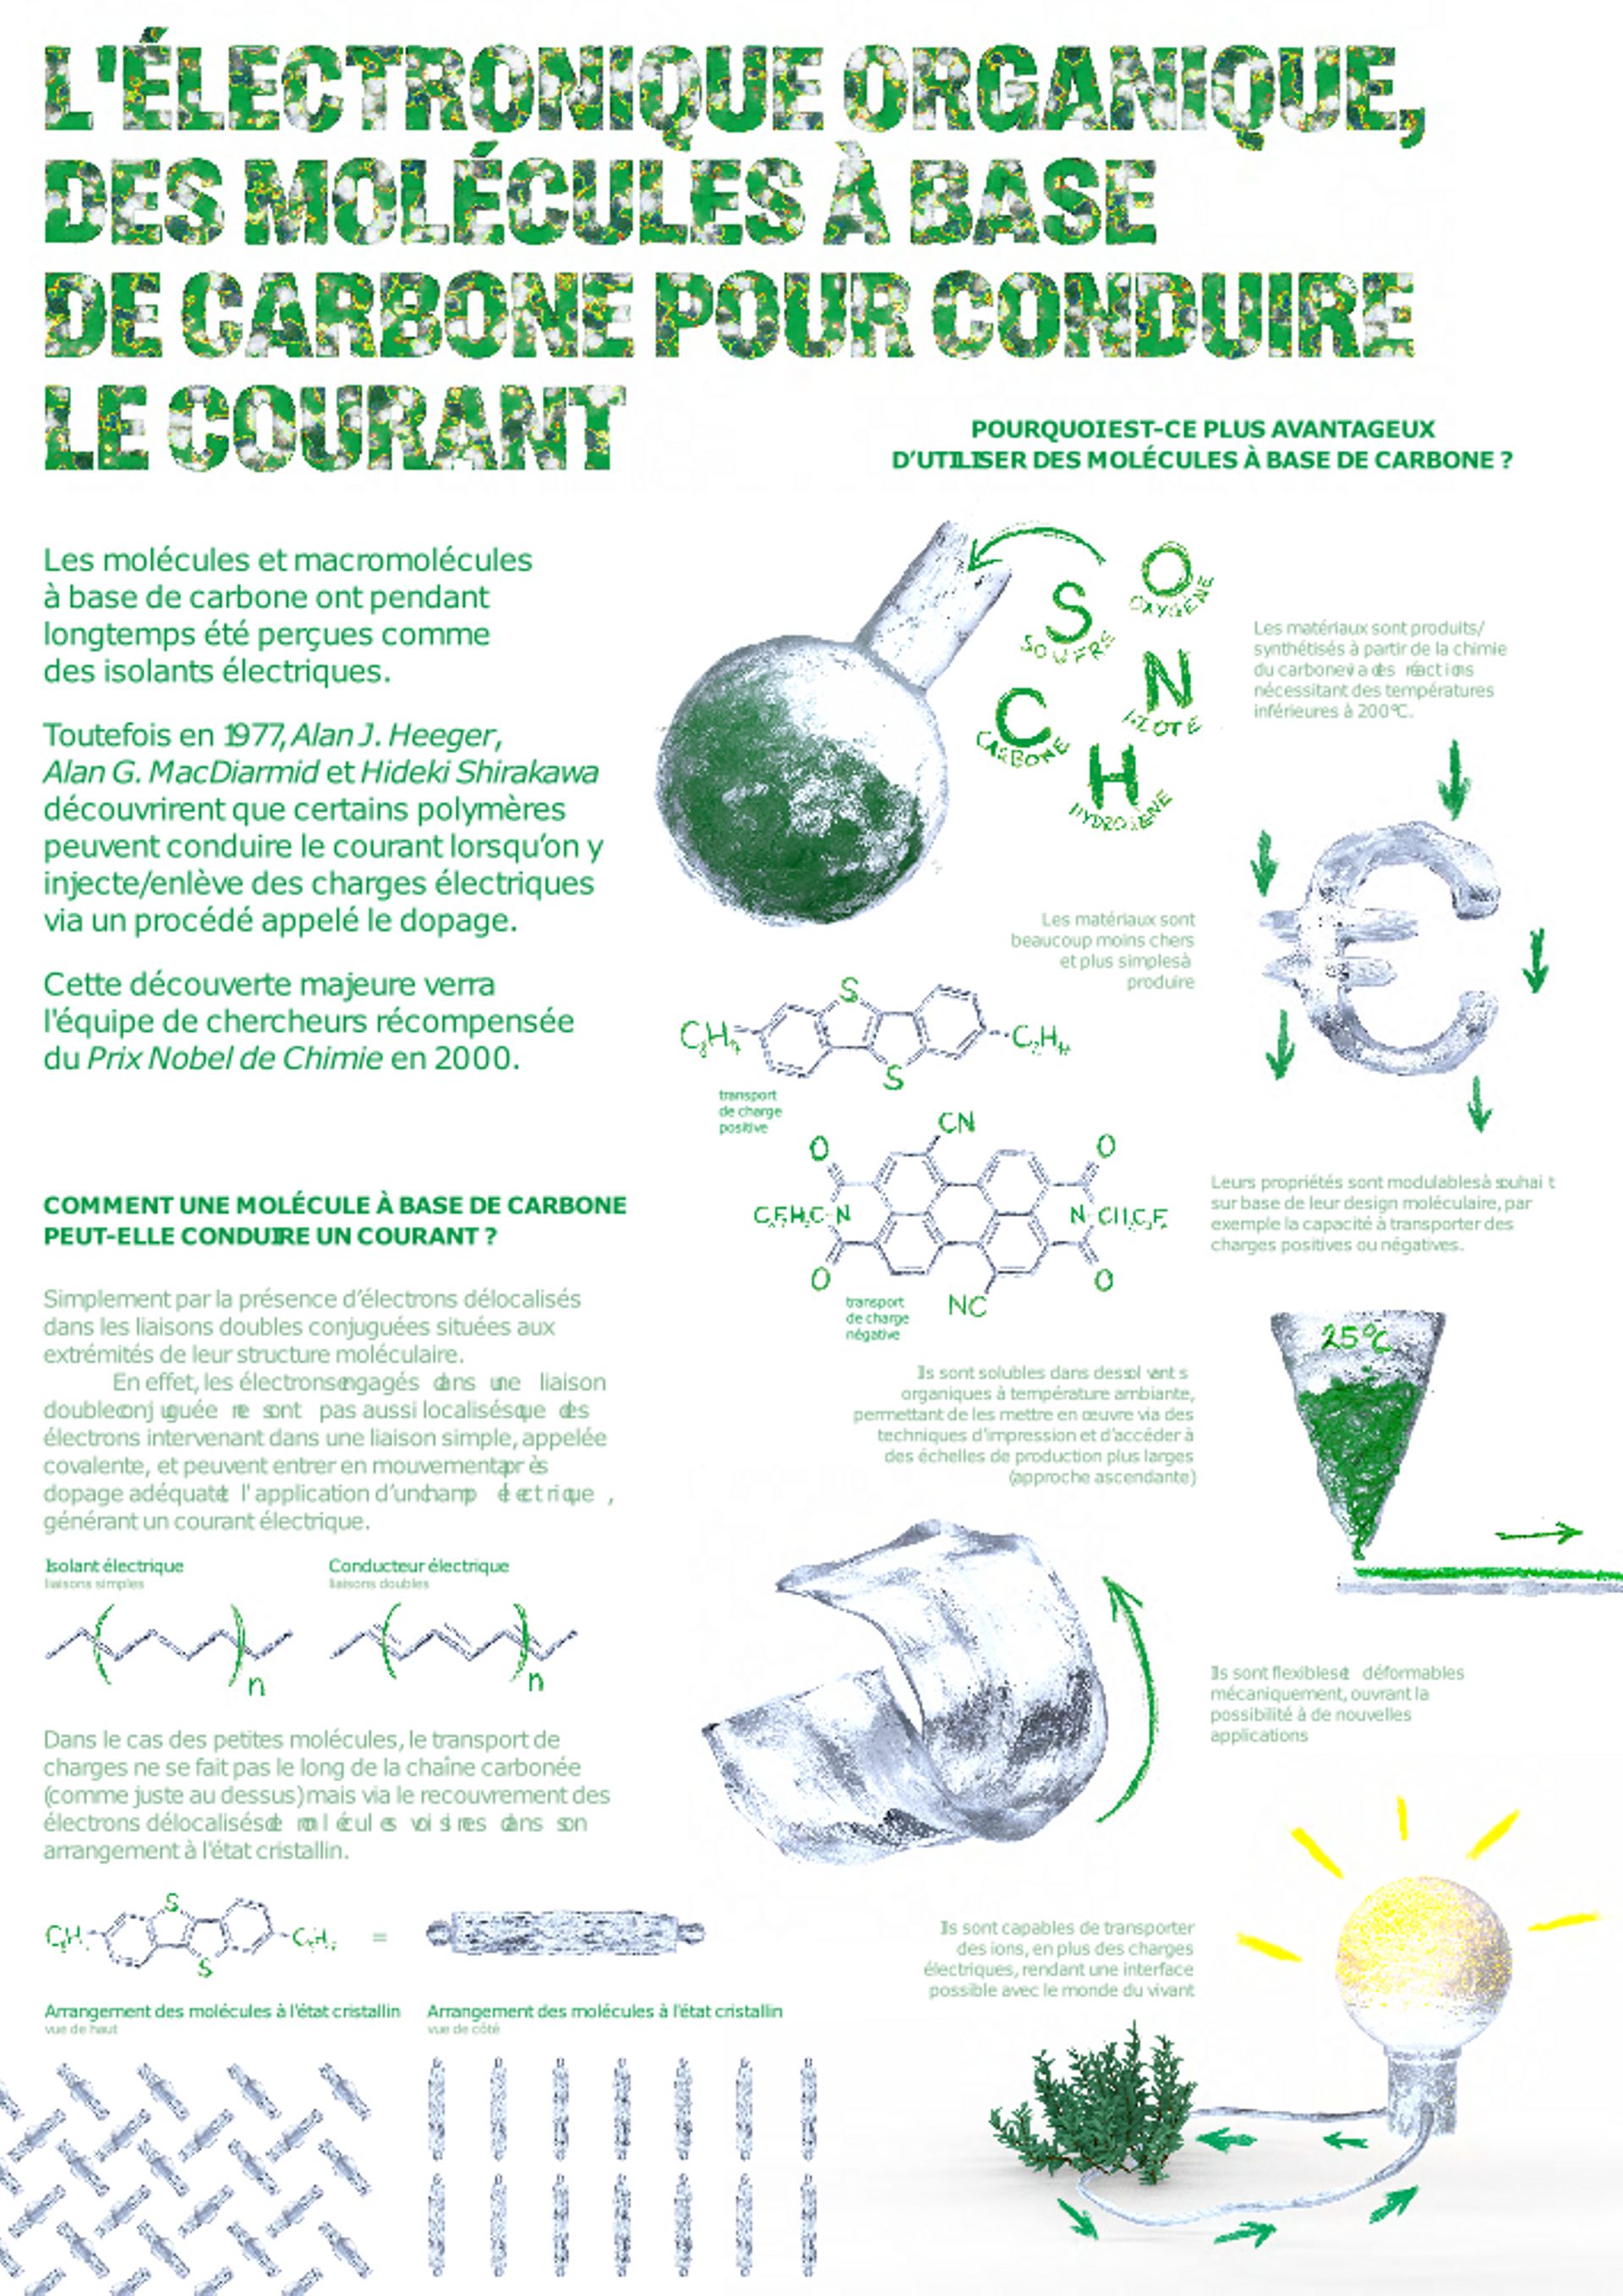 UNE ÉLECTRONIQUE VERTE ET DURABLE, C’EST POSSIBLE ? Research in Organic Electronics at
Department of Chemistry Laboratory of Polymer Chemistry